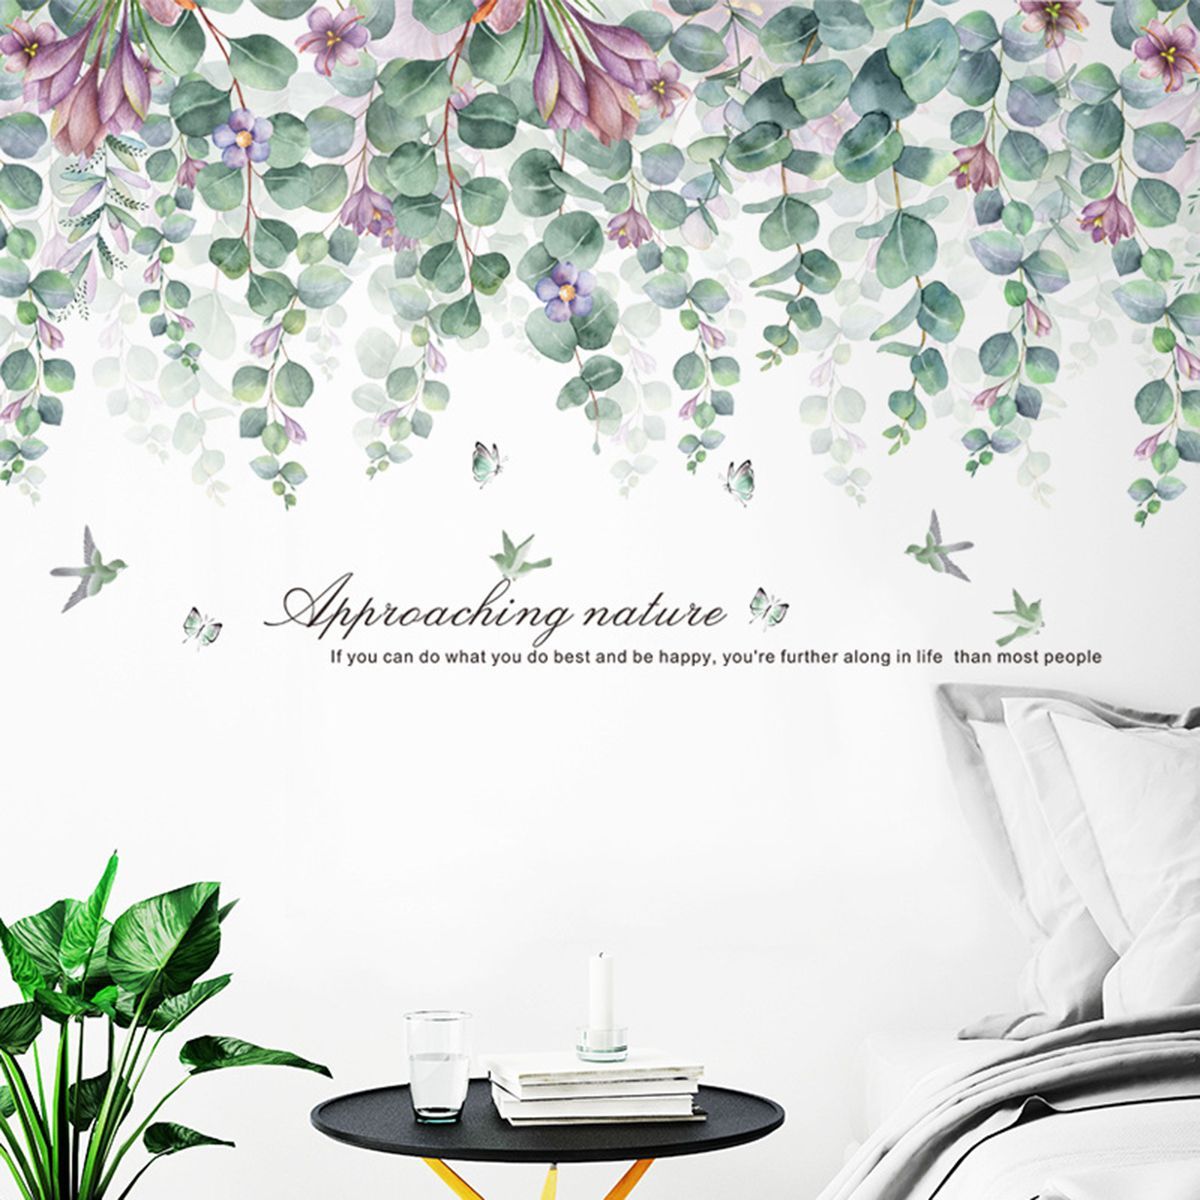 Tree-Branch-Leaves-Removable-Wall-Decal-PVC-Large-Sticker-Mural-Home-Decor-Art-1713629